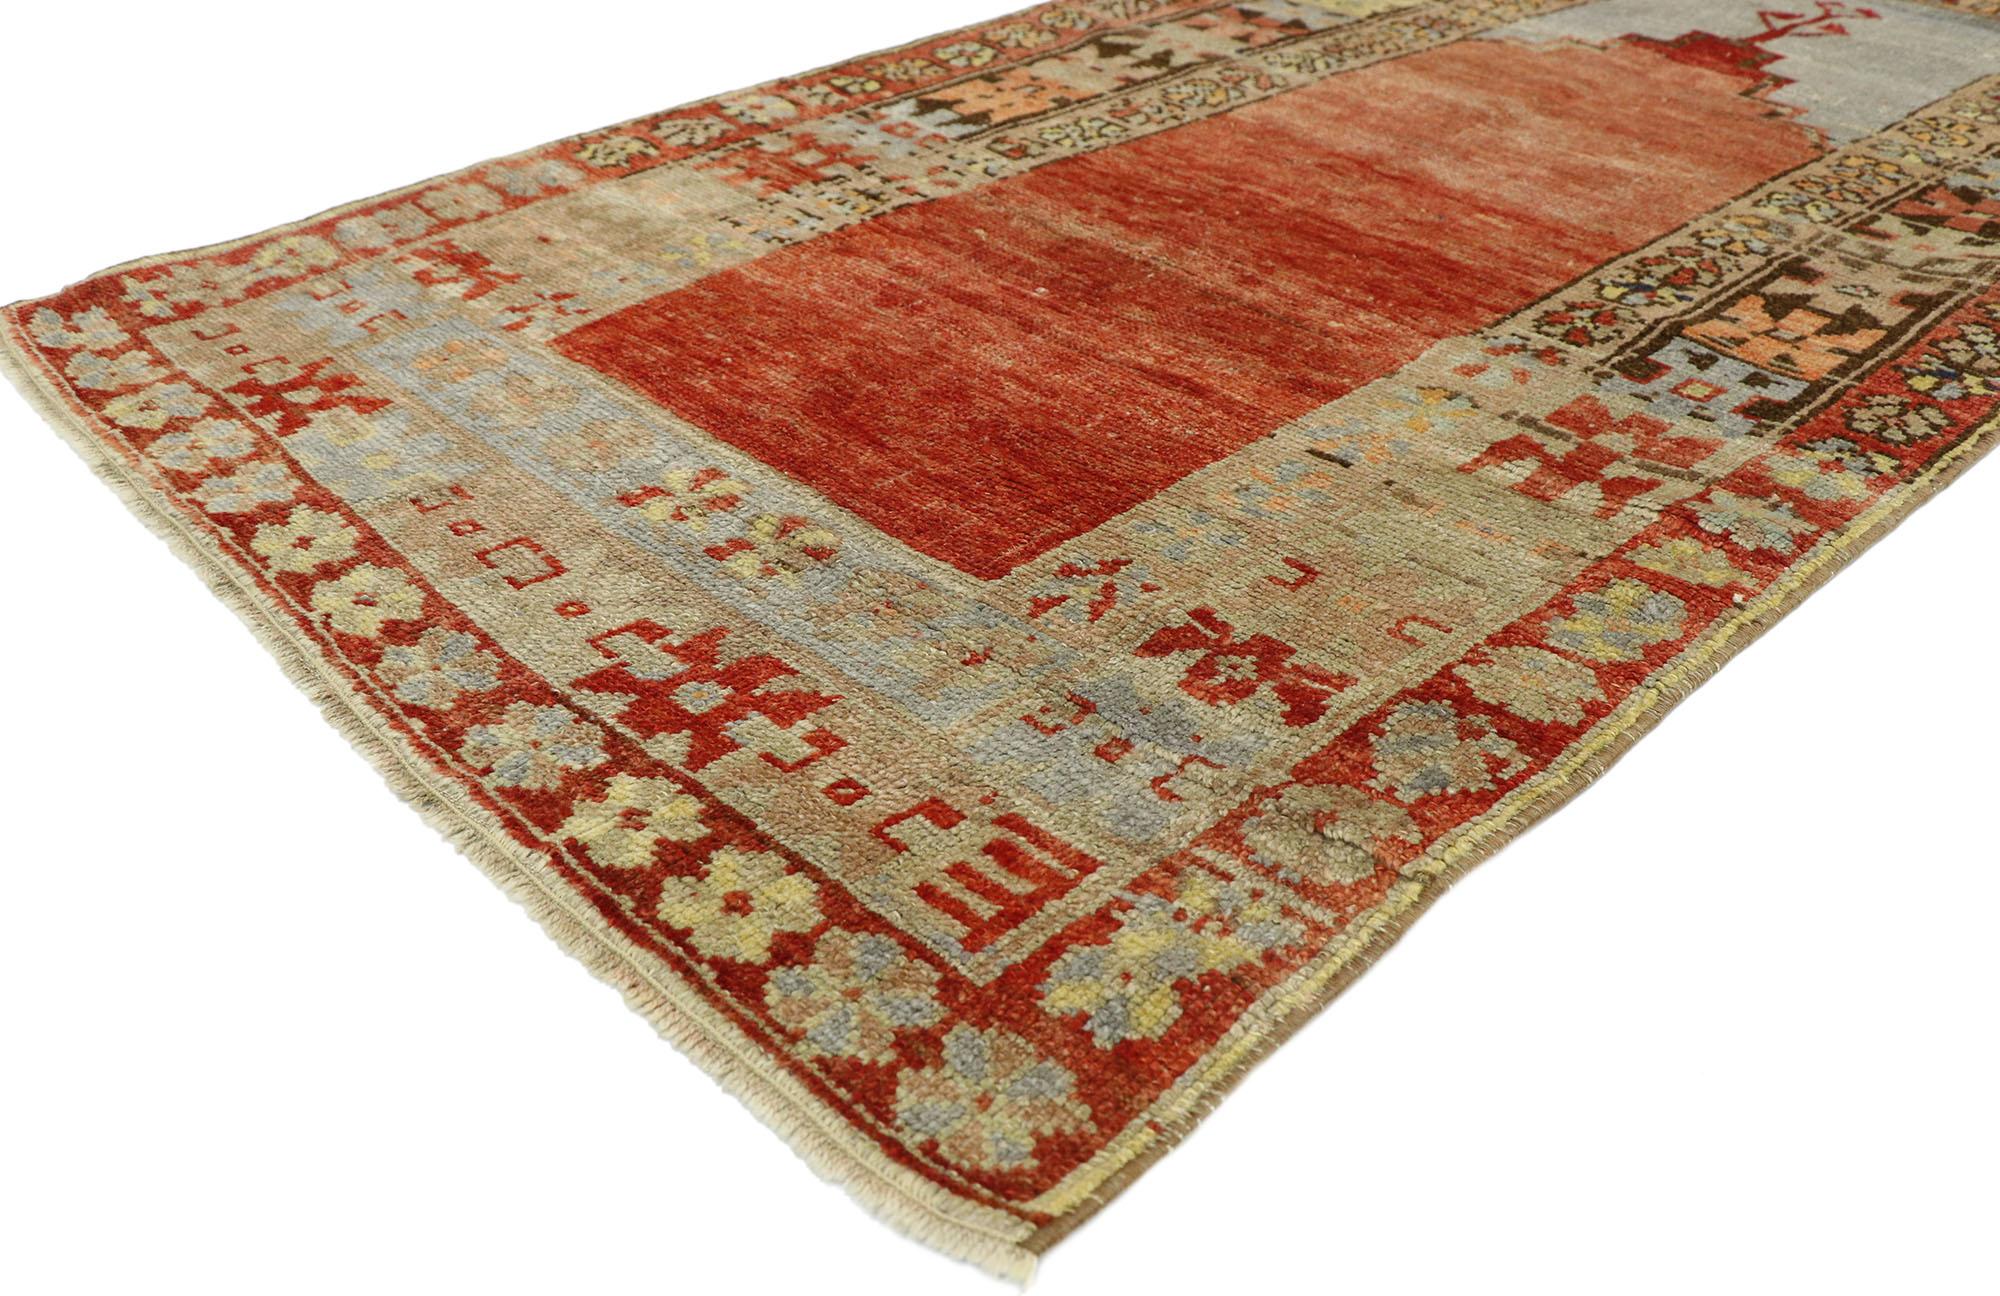 52748 vintage Turkish Oushak Prayer rug, Anatolian Prayer rug. Immersed in Anatolian history and refined colors, this hand knotted wool vintage Turkish prayer rug combines simplicity with sophistication. It features a mihrab niche with a Rams Horn